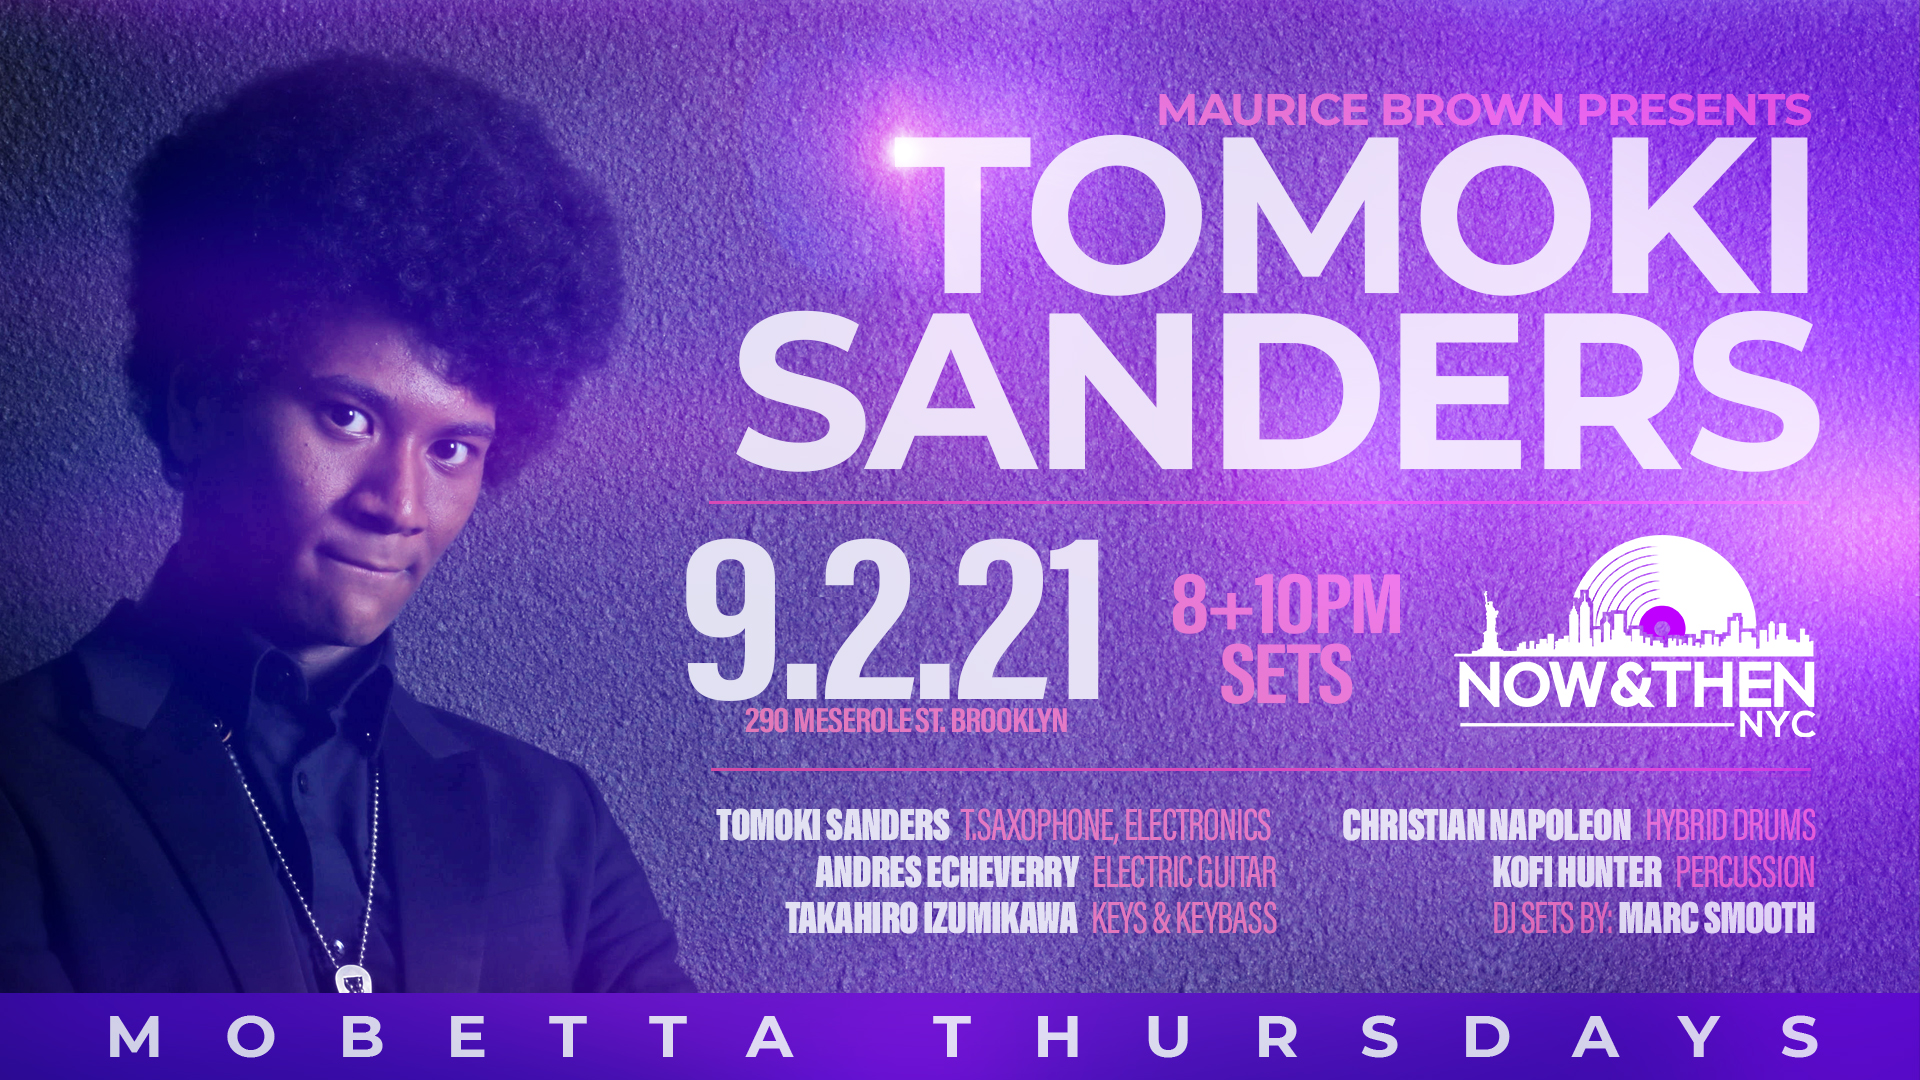 Photo for Mobetta Thursdays Curated By Maurice Brown Presents: Tomoki Sanders  September 2nd on ViewStub